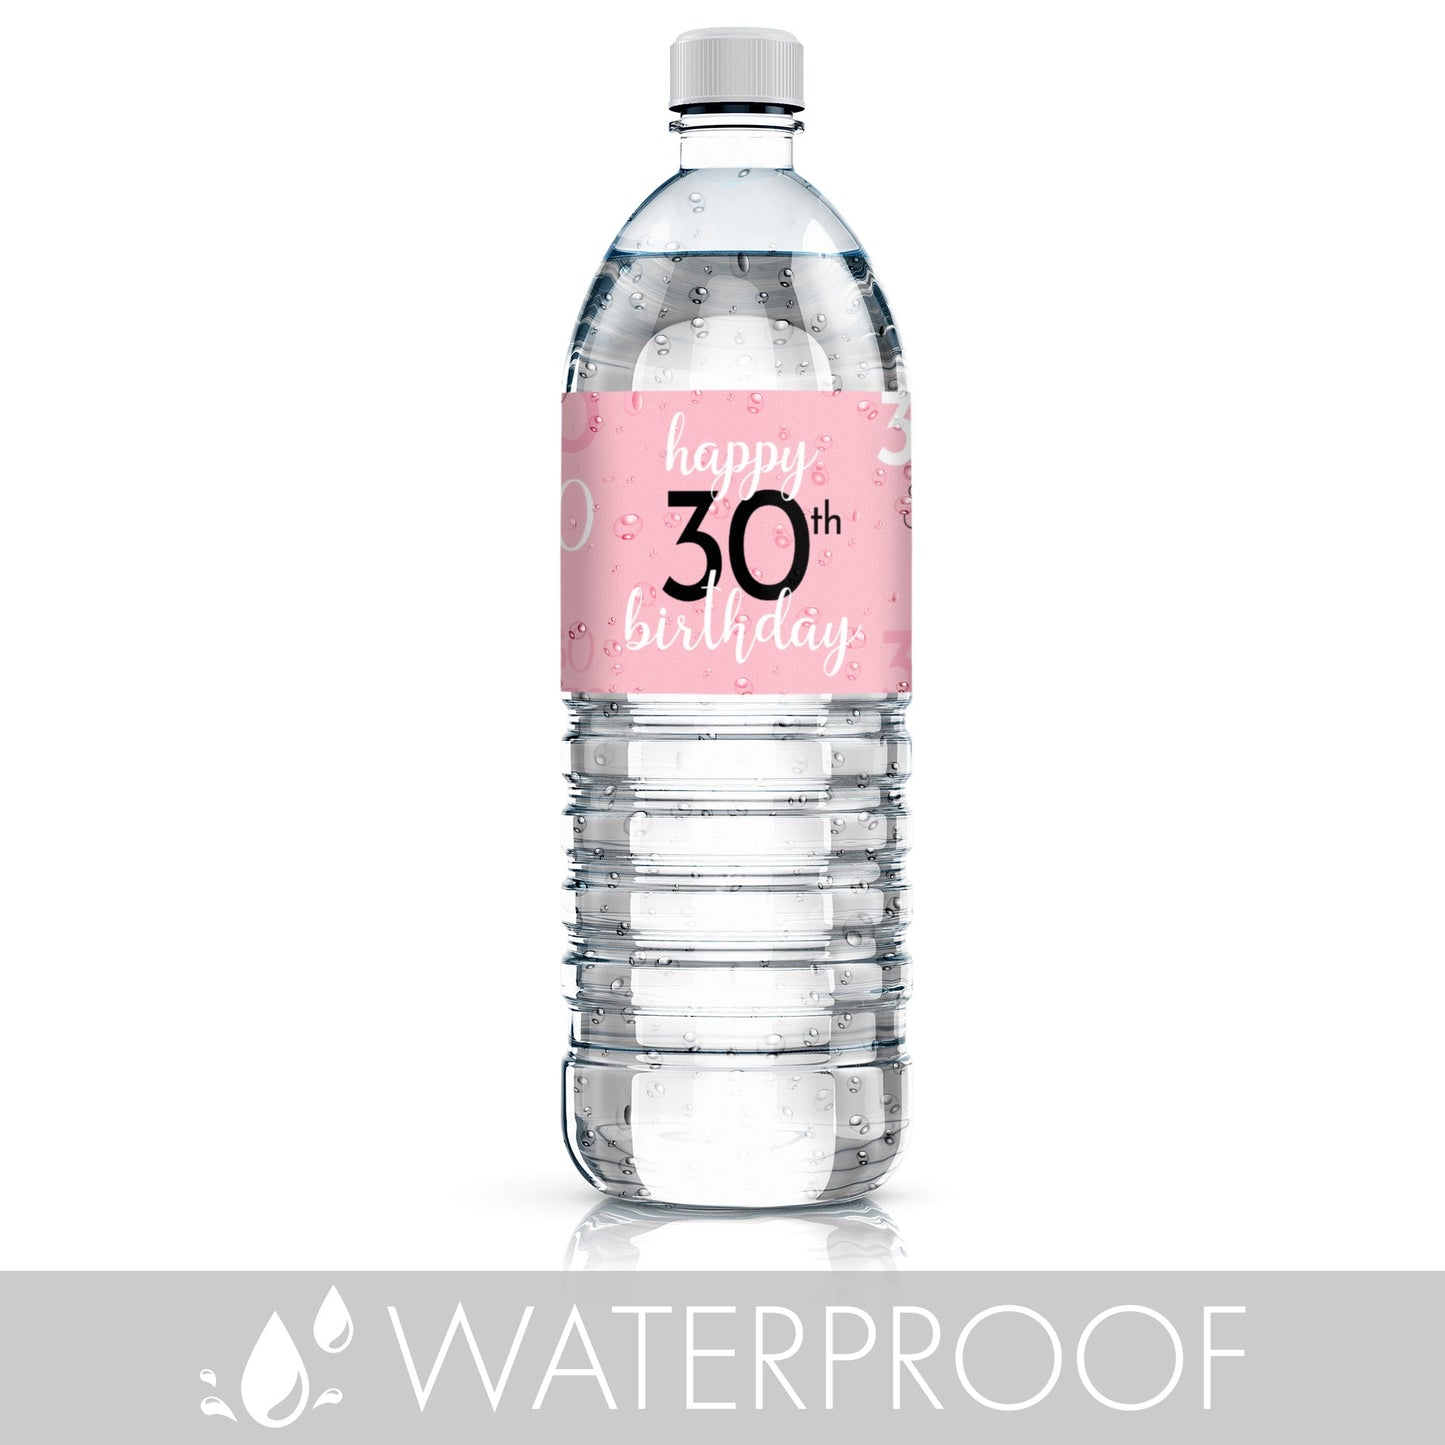 Personalize your water bottles with waterproof labels in a stylish 30th pink and black design